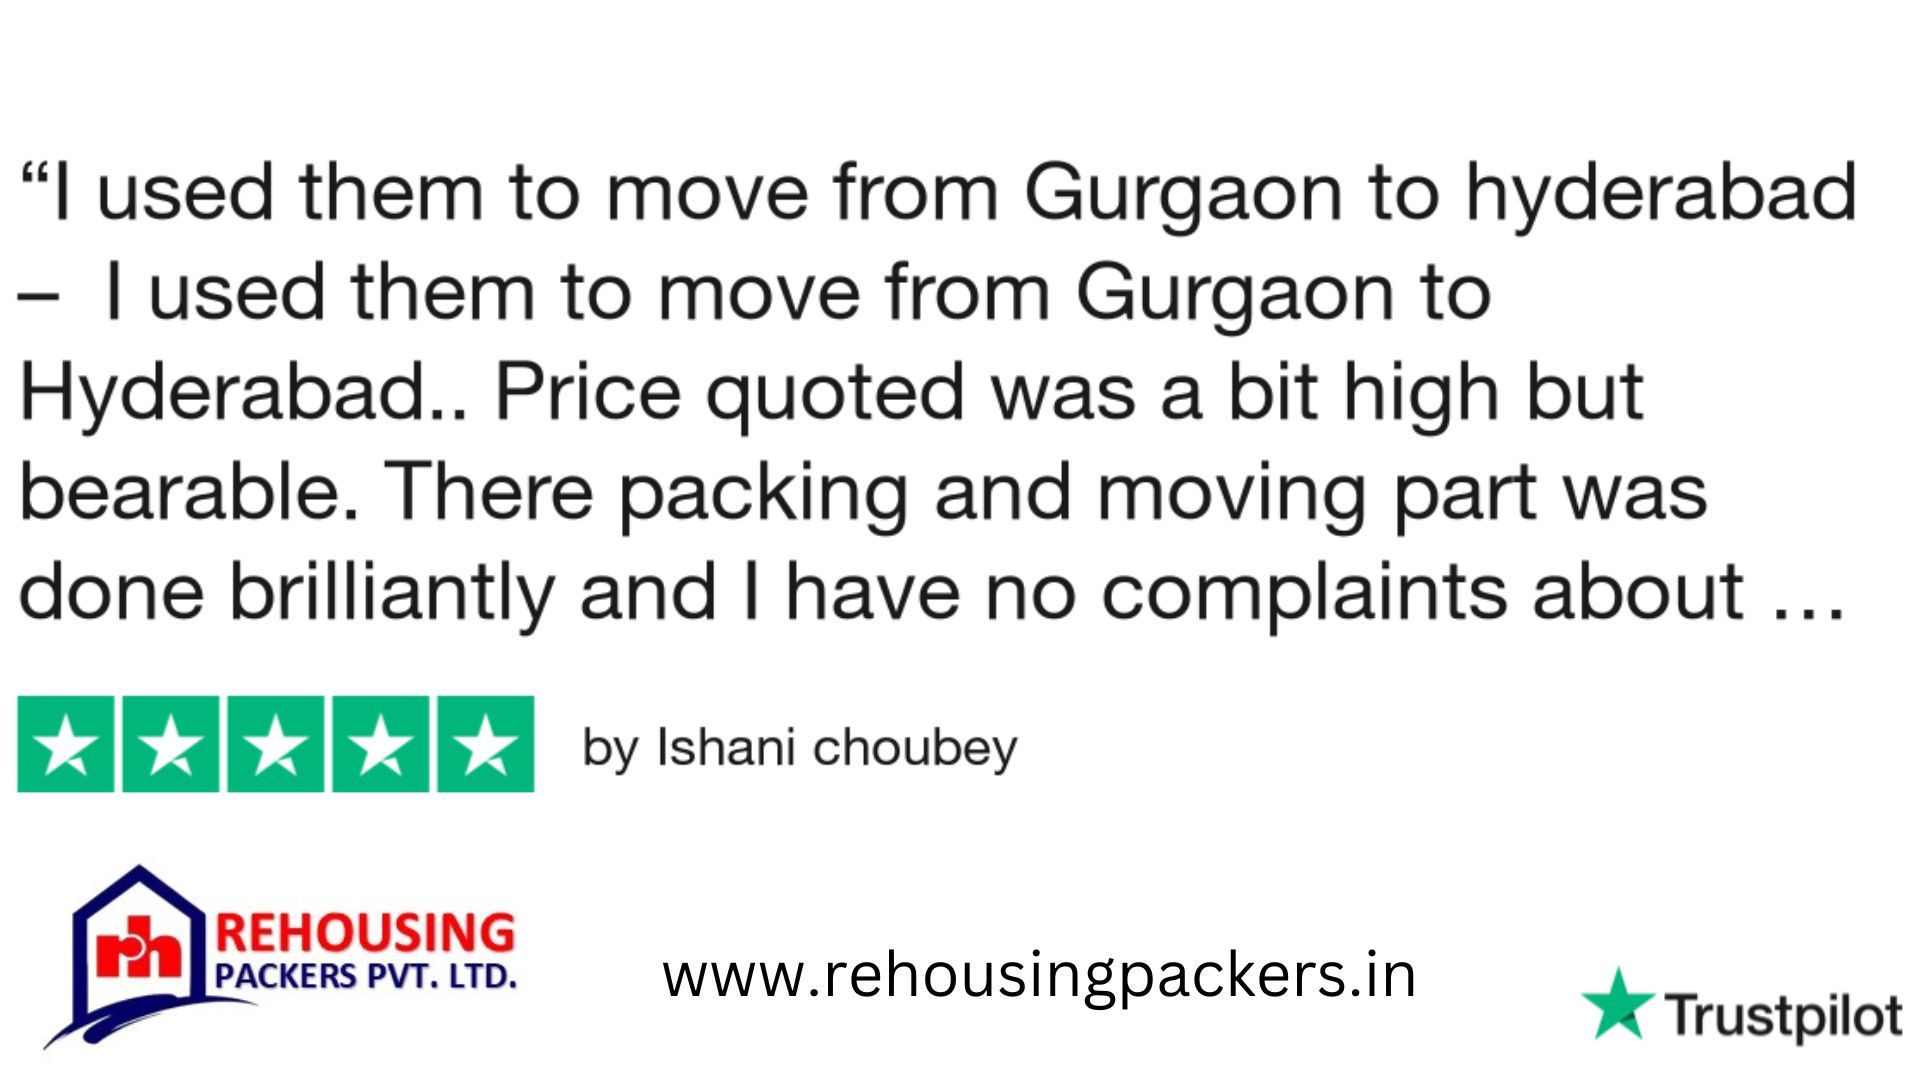 Rehousing packers and movers reviews trustpilot 9